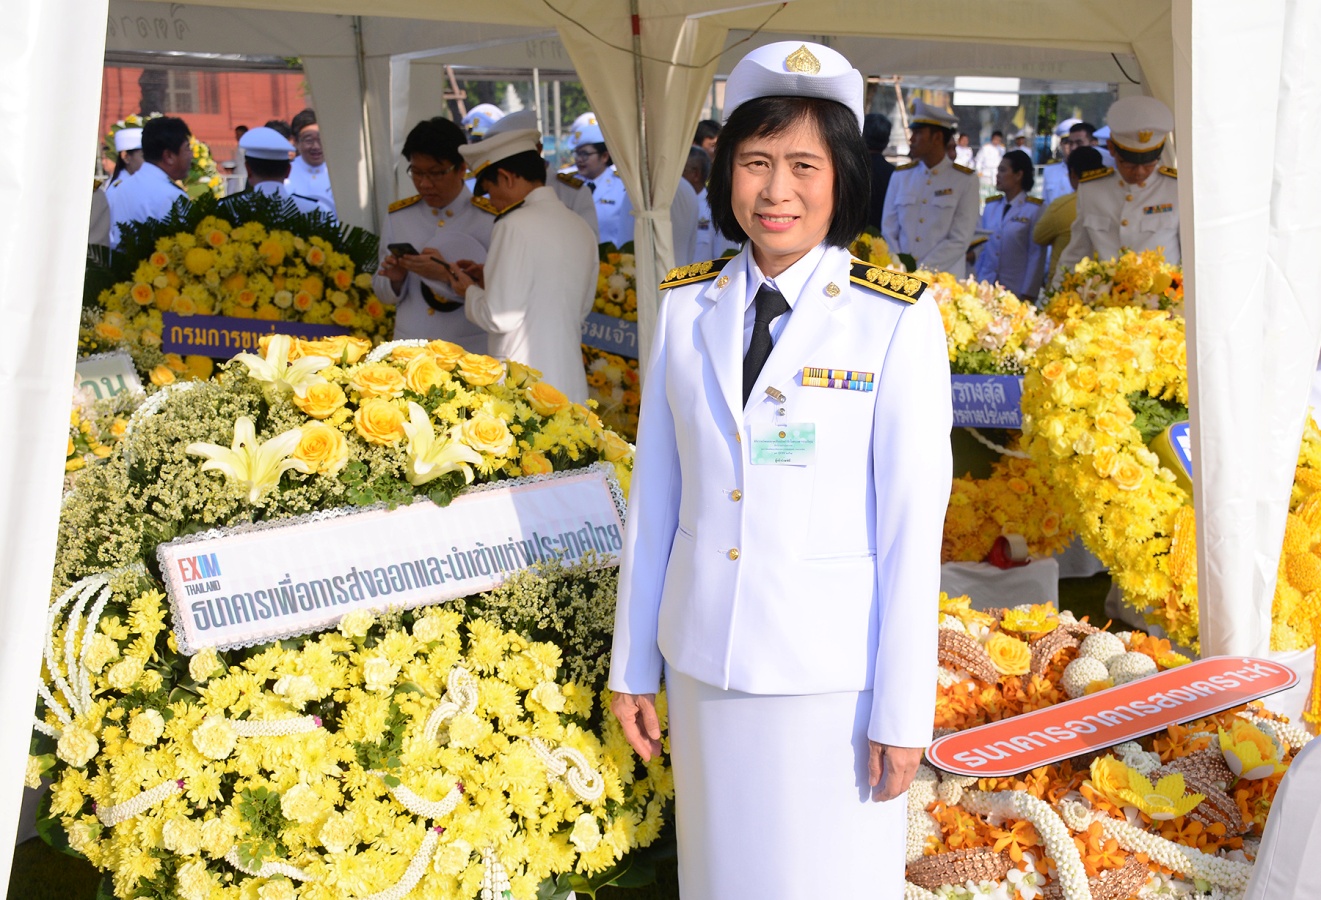 EXIM Thailand Joins the Wreath Laying Ceremony in Tribute of the Late King Bhumibol Adulyadej Memorial Day on October 13, 2018